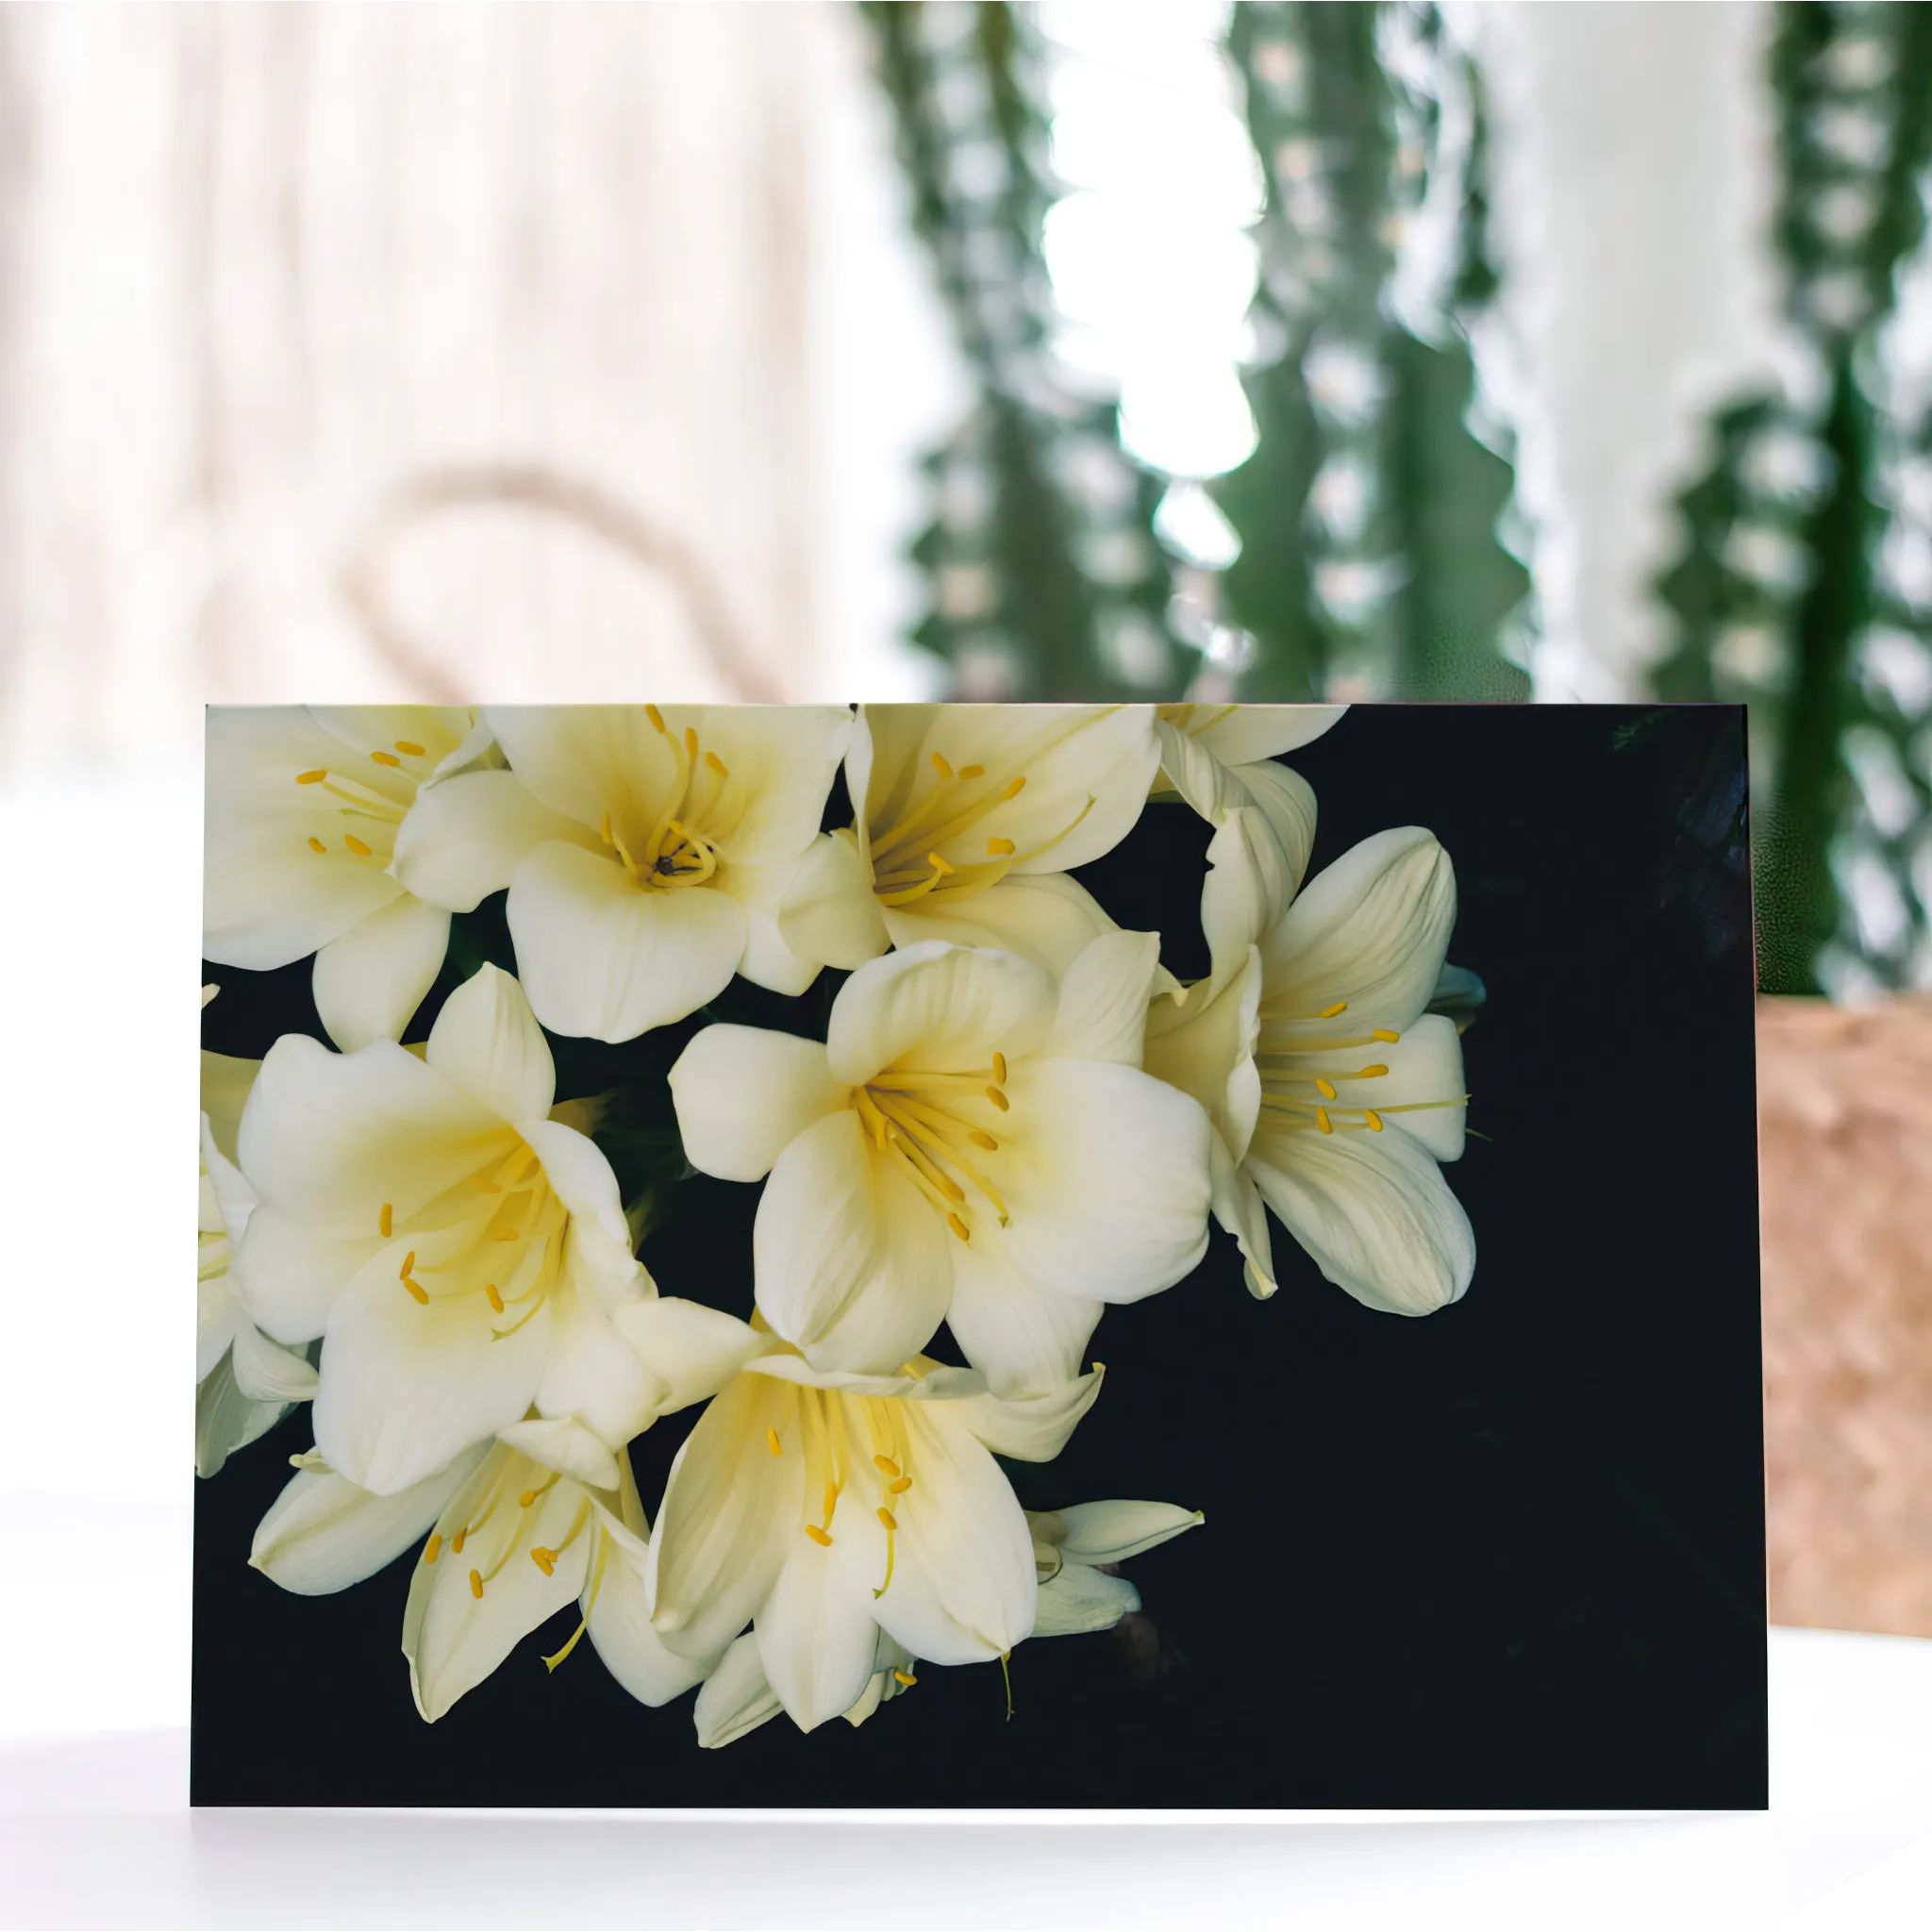 Flower Power Too Greeting Card - Greeting & Note Cards - Aesthetic Art